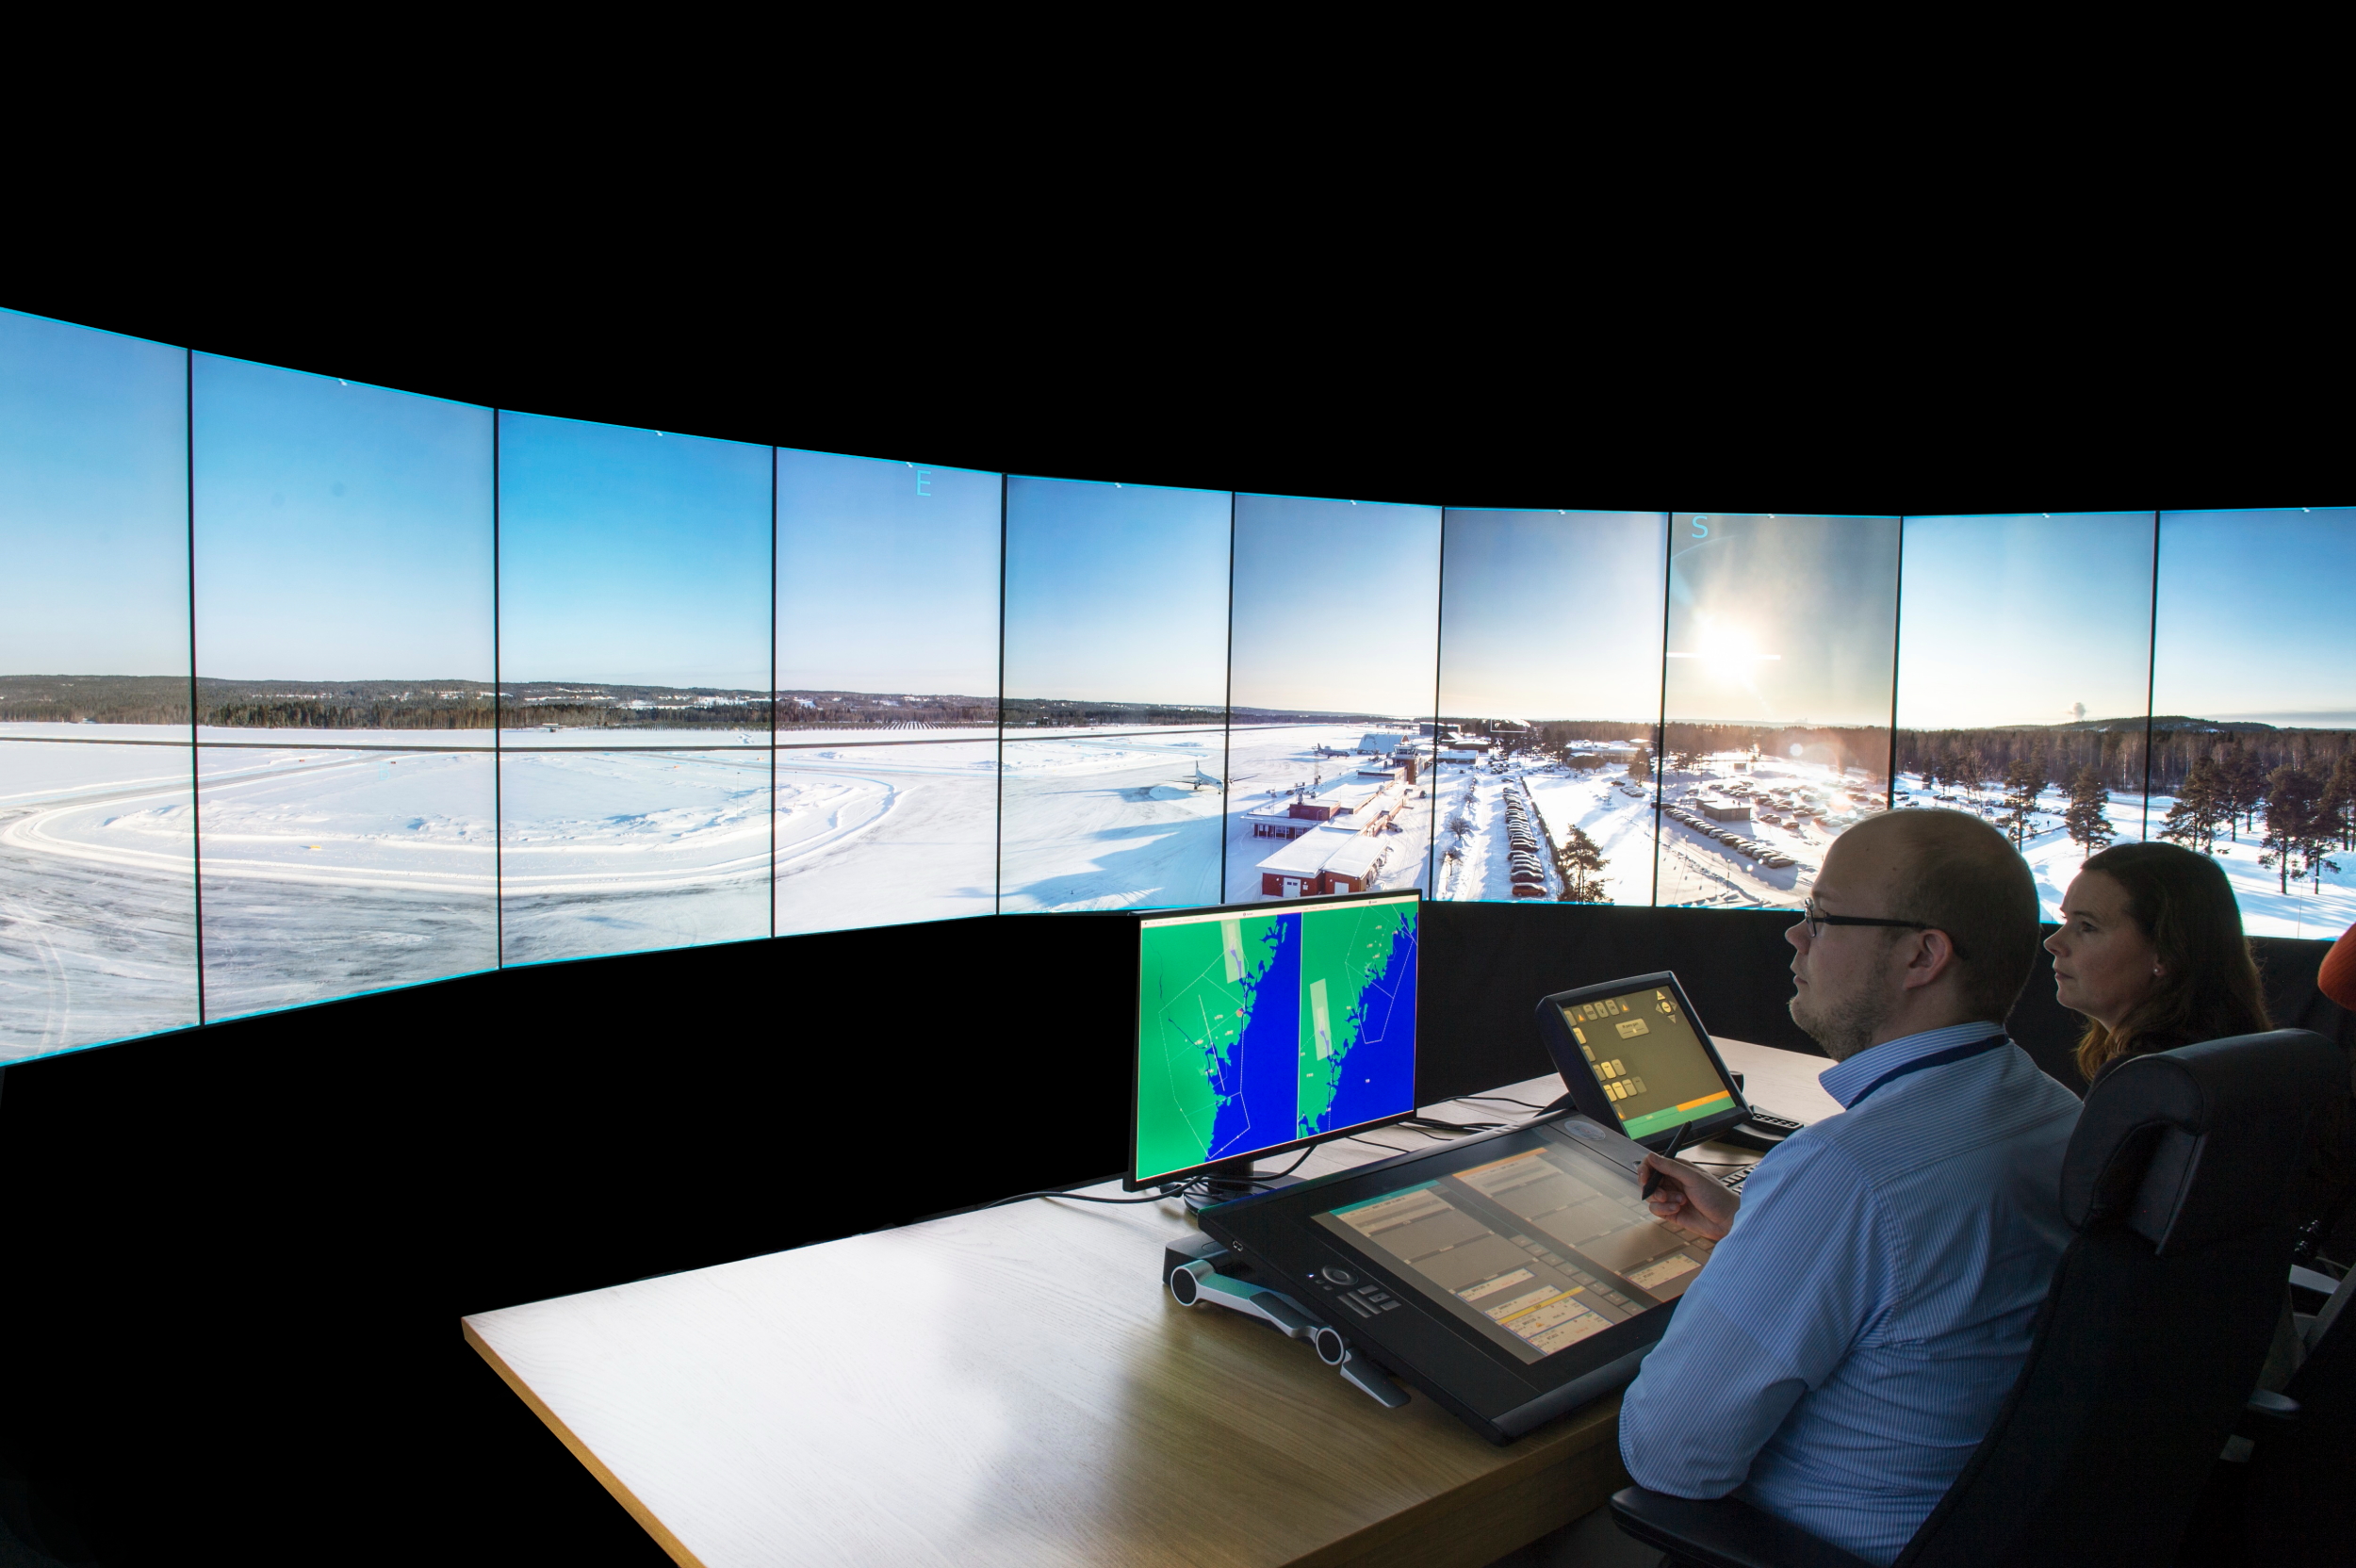 Saab Digital Air Traffic Solutions (SDATS) has signed a 20-year framework agreement for remote tower systems with Air Traffic Control Netherlands (LVNL). SDATS has received an initial order within the framework contract for establishing remote towers at the airports of Groningen and Maastricht and a remote tower center at Schiphol Airport. Click to enlarge.